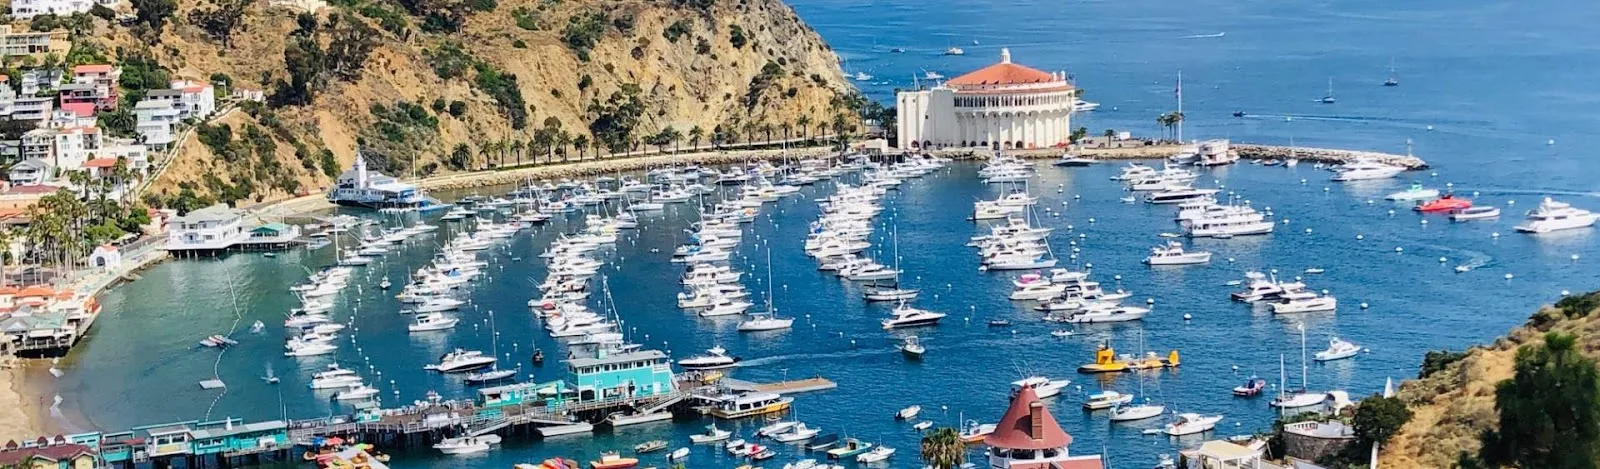 A Peaceful Retreat on Catalina Island, California Are life's stresses and strains overwhelming you? Look no further than Catalina Island for a tranquil getaway that will leave you feeling relaxed and rejuvenated. Despite being only 22 miles away from the mainland, this island feels like a world apart with its unique lifestyle and small population. With limited access points and minimal vehicle noise, Catalina Island offers a serene environment where cars are scarce and visitors can easily explore on foot or by bicycle.    Escape to Serenity Experience a true escape from the chaos of everyday life on Catalina Island. With its secluded location and peaceful atmosphere, this destination is perfect for those seeking tranquility.    Discover Hidden Gems Start your journey at the local Chamber of Commerce & Visitors Bureau, where you can gather all the information you need for an unforgettable stay. From events and attractions to dining and accommodations, they have you covered. It is advisable to reserve your room in advance, especially during peak months when availability is limited.    Unveil the Island's History Immerse yourself in the rich history of Catalina Island by visiting the Catalina Island Museum. From its Hollywood era to the Native American heritage, this museum offers a fascinating journey through time.    Explore Nature's Beauty Just a short distance from Avalon, discover the breathtaking Wrigley Botanical Gardens. Formerly owned by William Wrigley, the gardens showcase a diverse array of flora and fauna, making it a must-visit for nature enthusiasts. For a unique experience, consider staying at Wrigley's converted mansion, now a charming bed and breakfast.    A Beach Oasis While Catalina Island may not boast the same attractions as Los Angeles or San Francisco, it offers a different kind of allure. For those seeking respite from the hustle and bustle of city life, this idyllic beach destination provides the perfect sanctuary.    Embark on a journey to Catalina Island and let its peaceful ambiance wash away your worries. Whether you're looking to unwind on the beach, explore the island's history, or reconnect with nature, this hidden gem promises a serene retreat like no other.